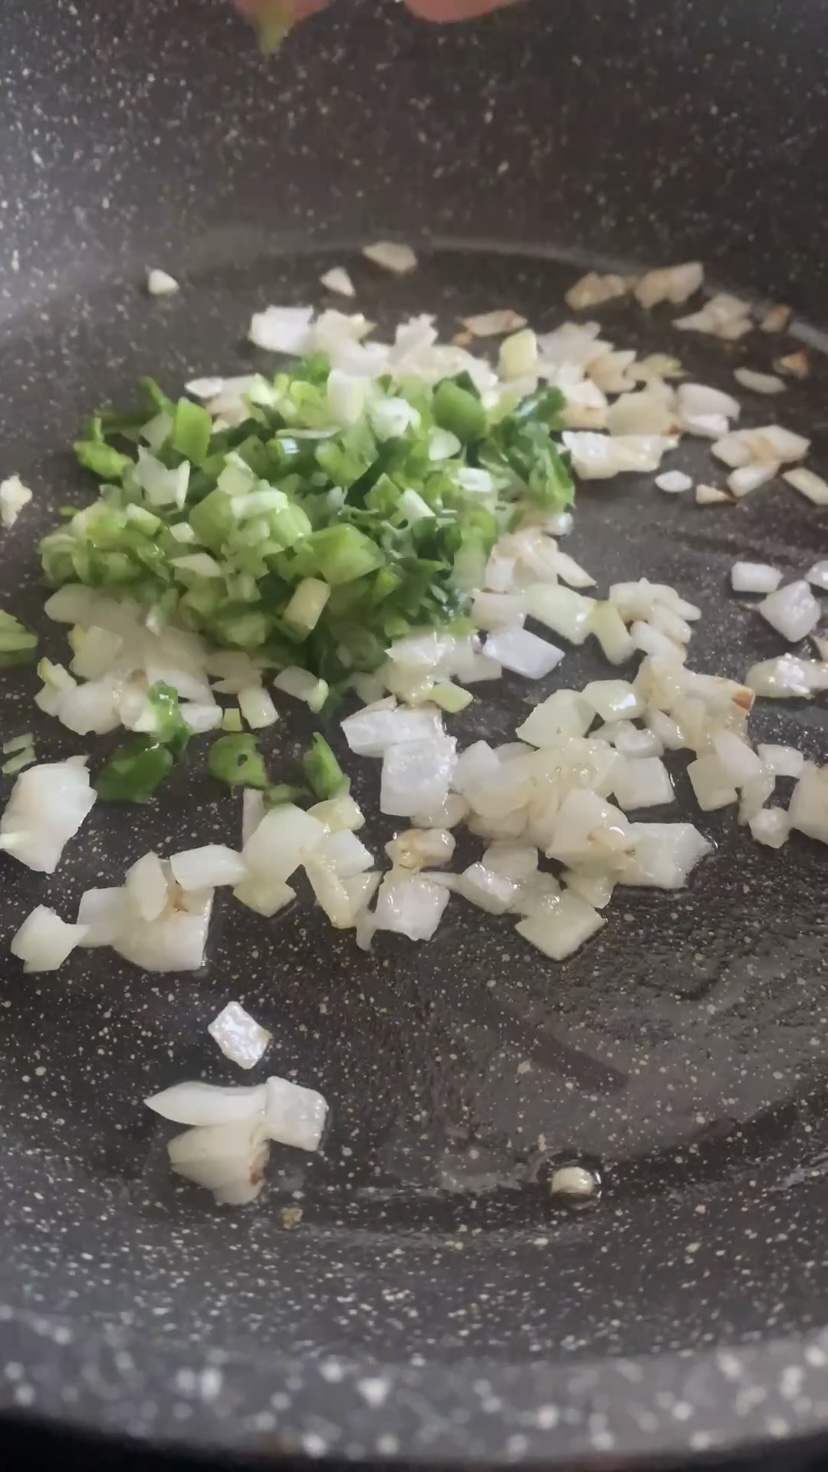 Cooking onion and green onion.